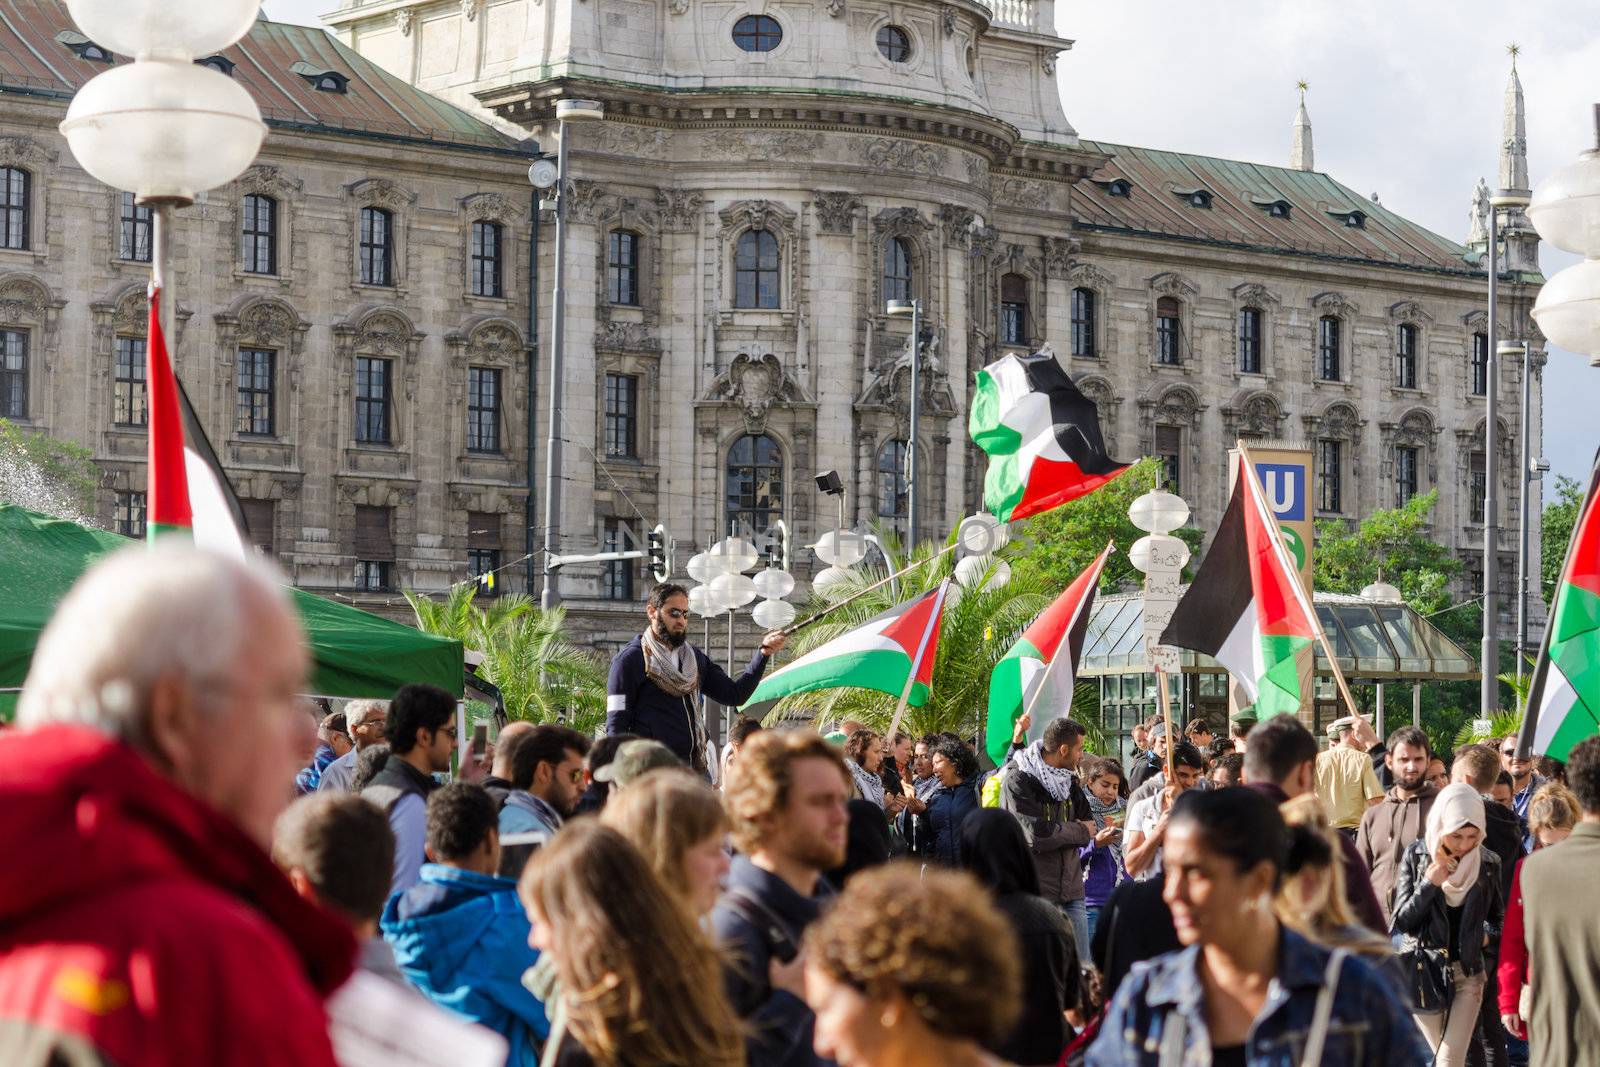 MUNICH, GERMANY - AUGUST 16, 2014: A rally against the war in Gaza. Protesters demand to stop the shelling of Gaza and Israel withdraw from the occupied Palestinian territories.